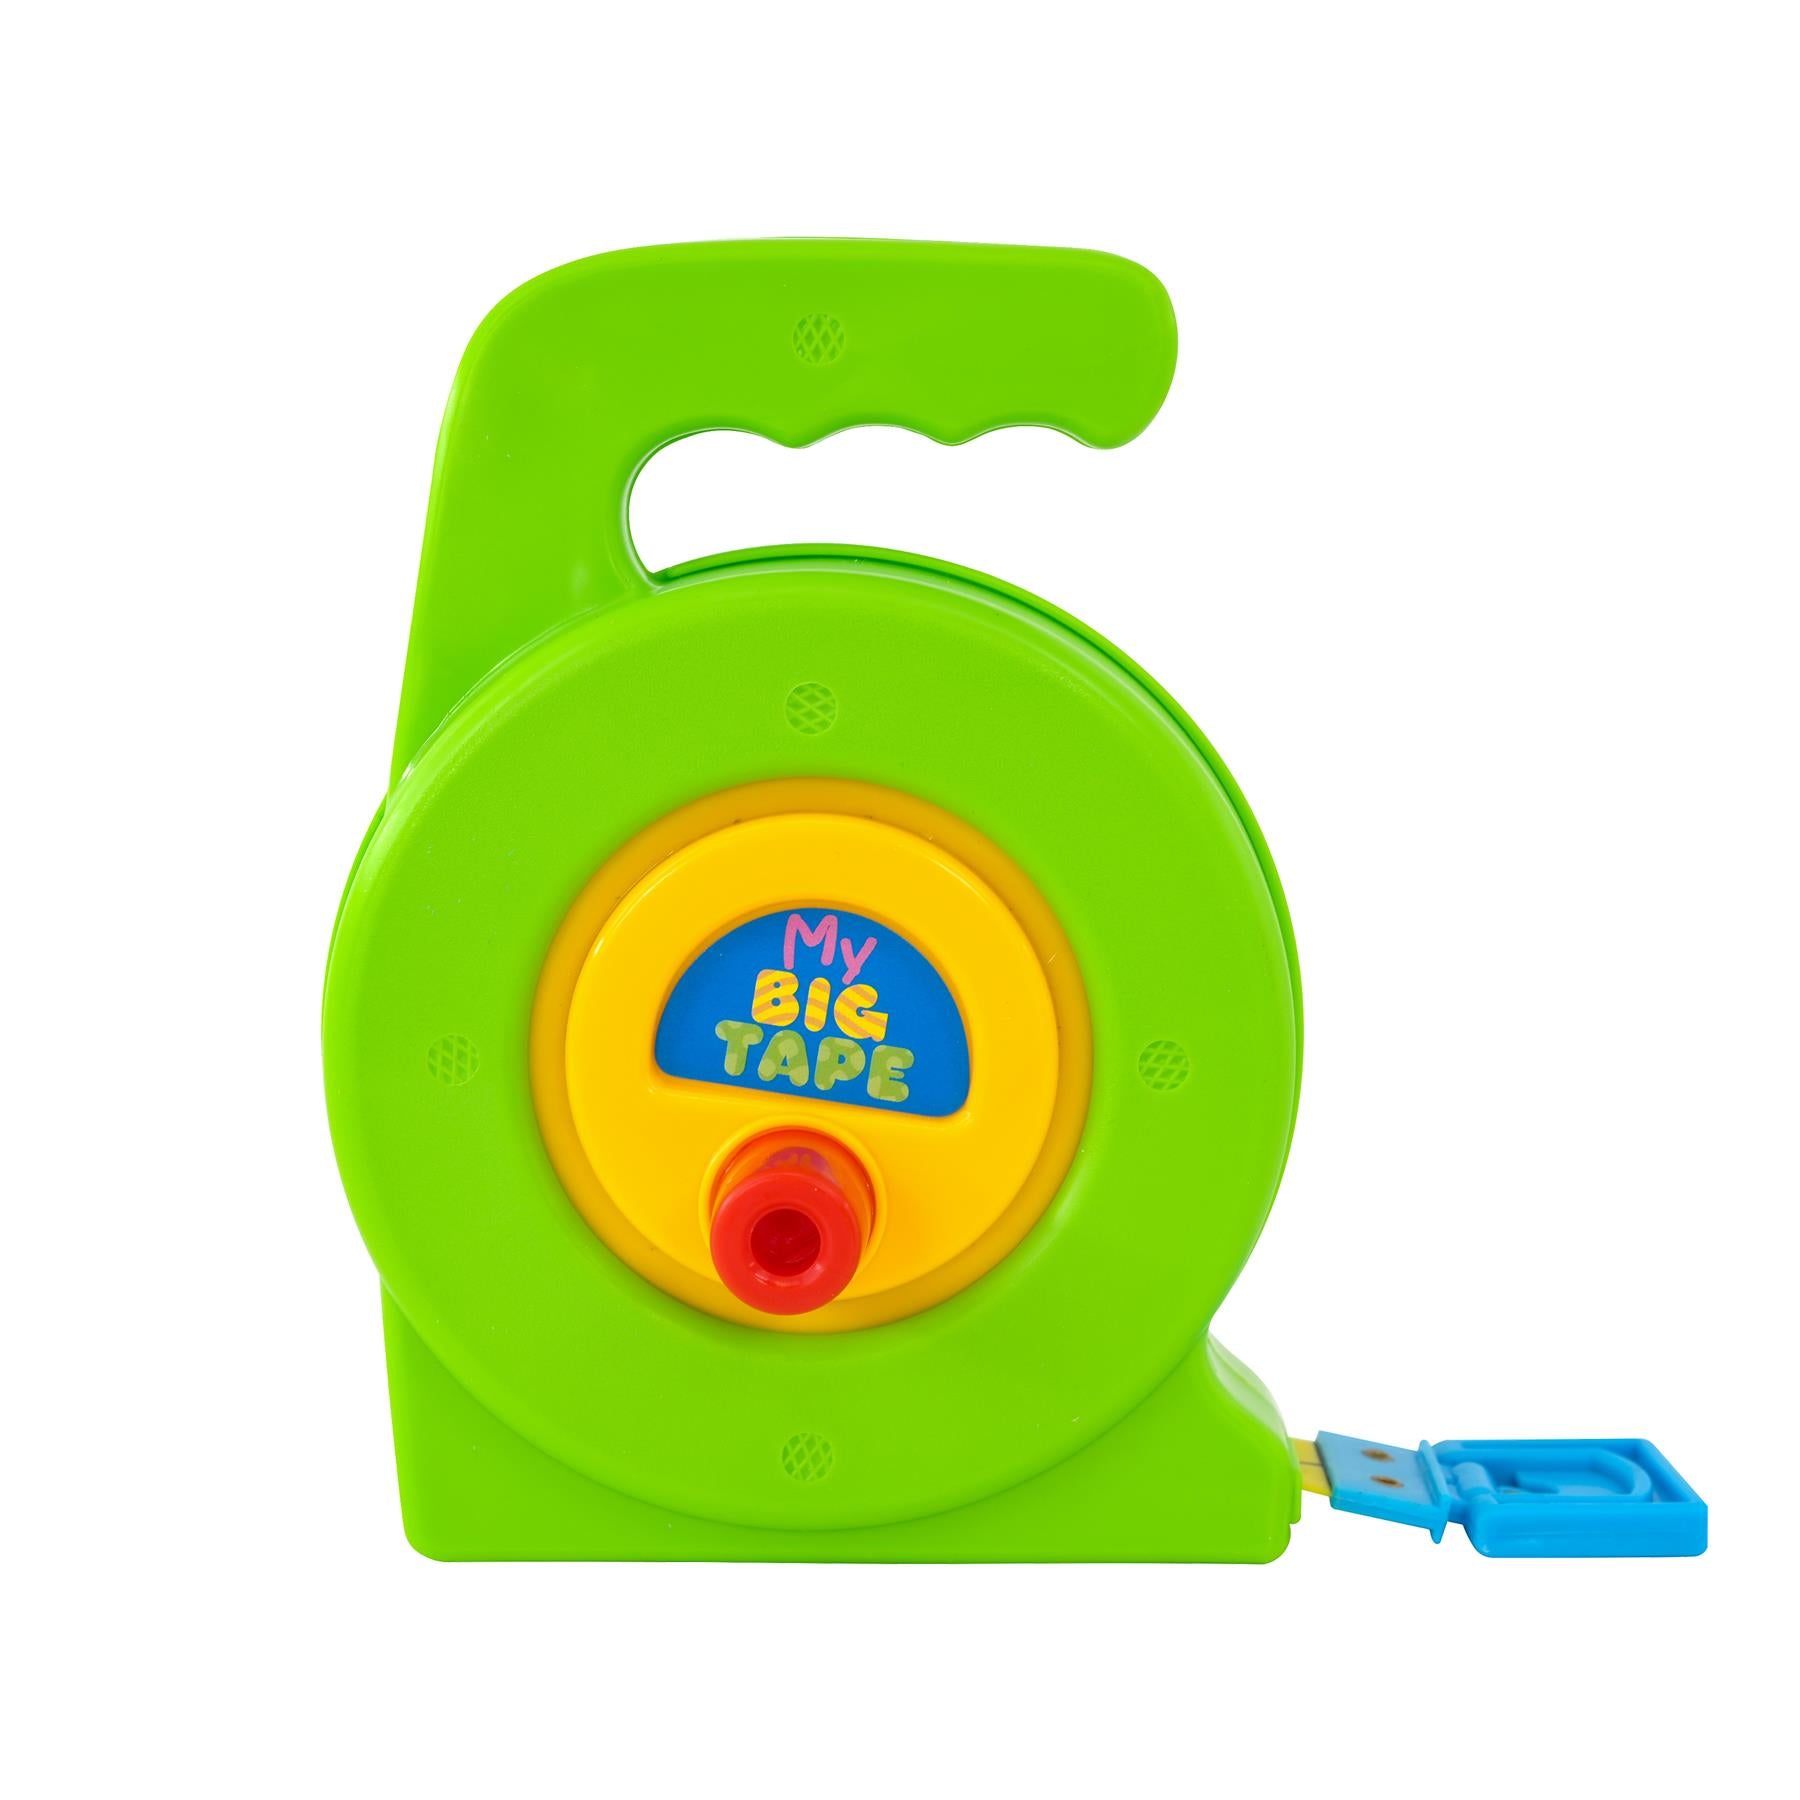 Tape Measure Toy by The Magic Toy Shop - UKBuyZone